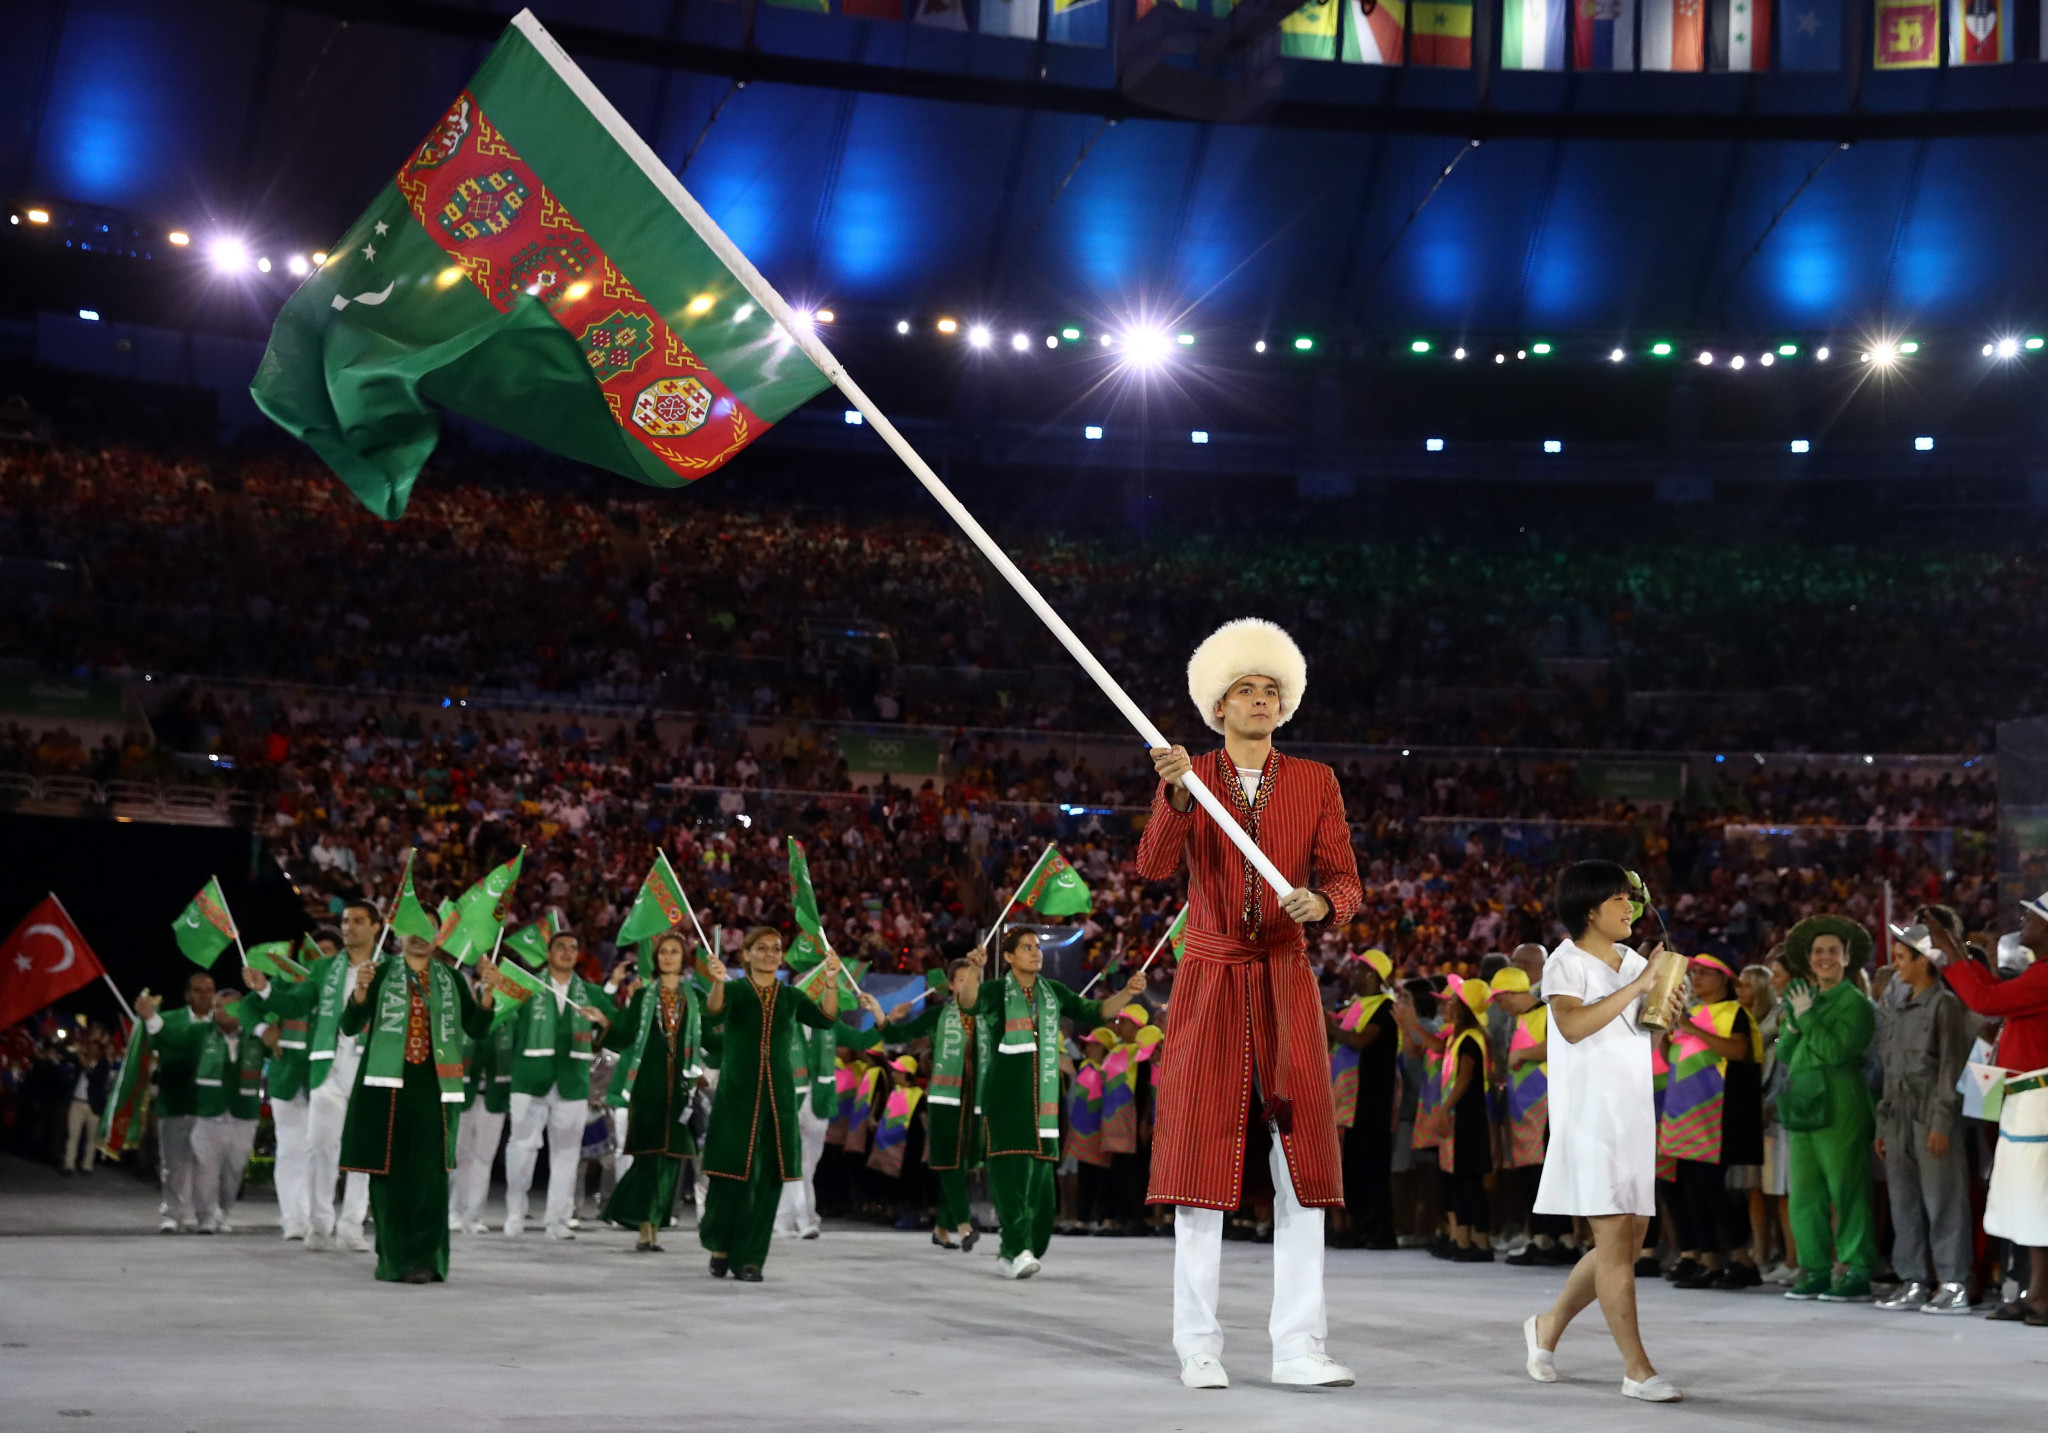 Turkmenistan is due to host the event in Ashgabat ©Getty Images